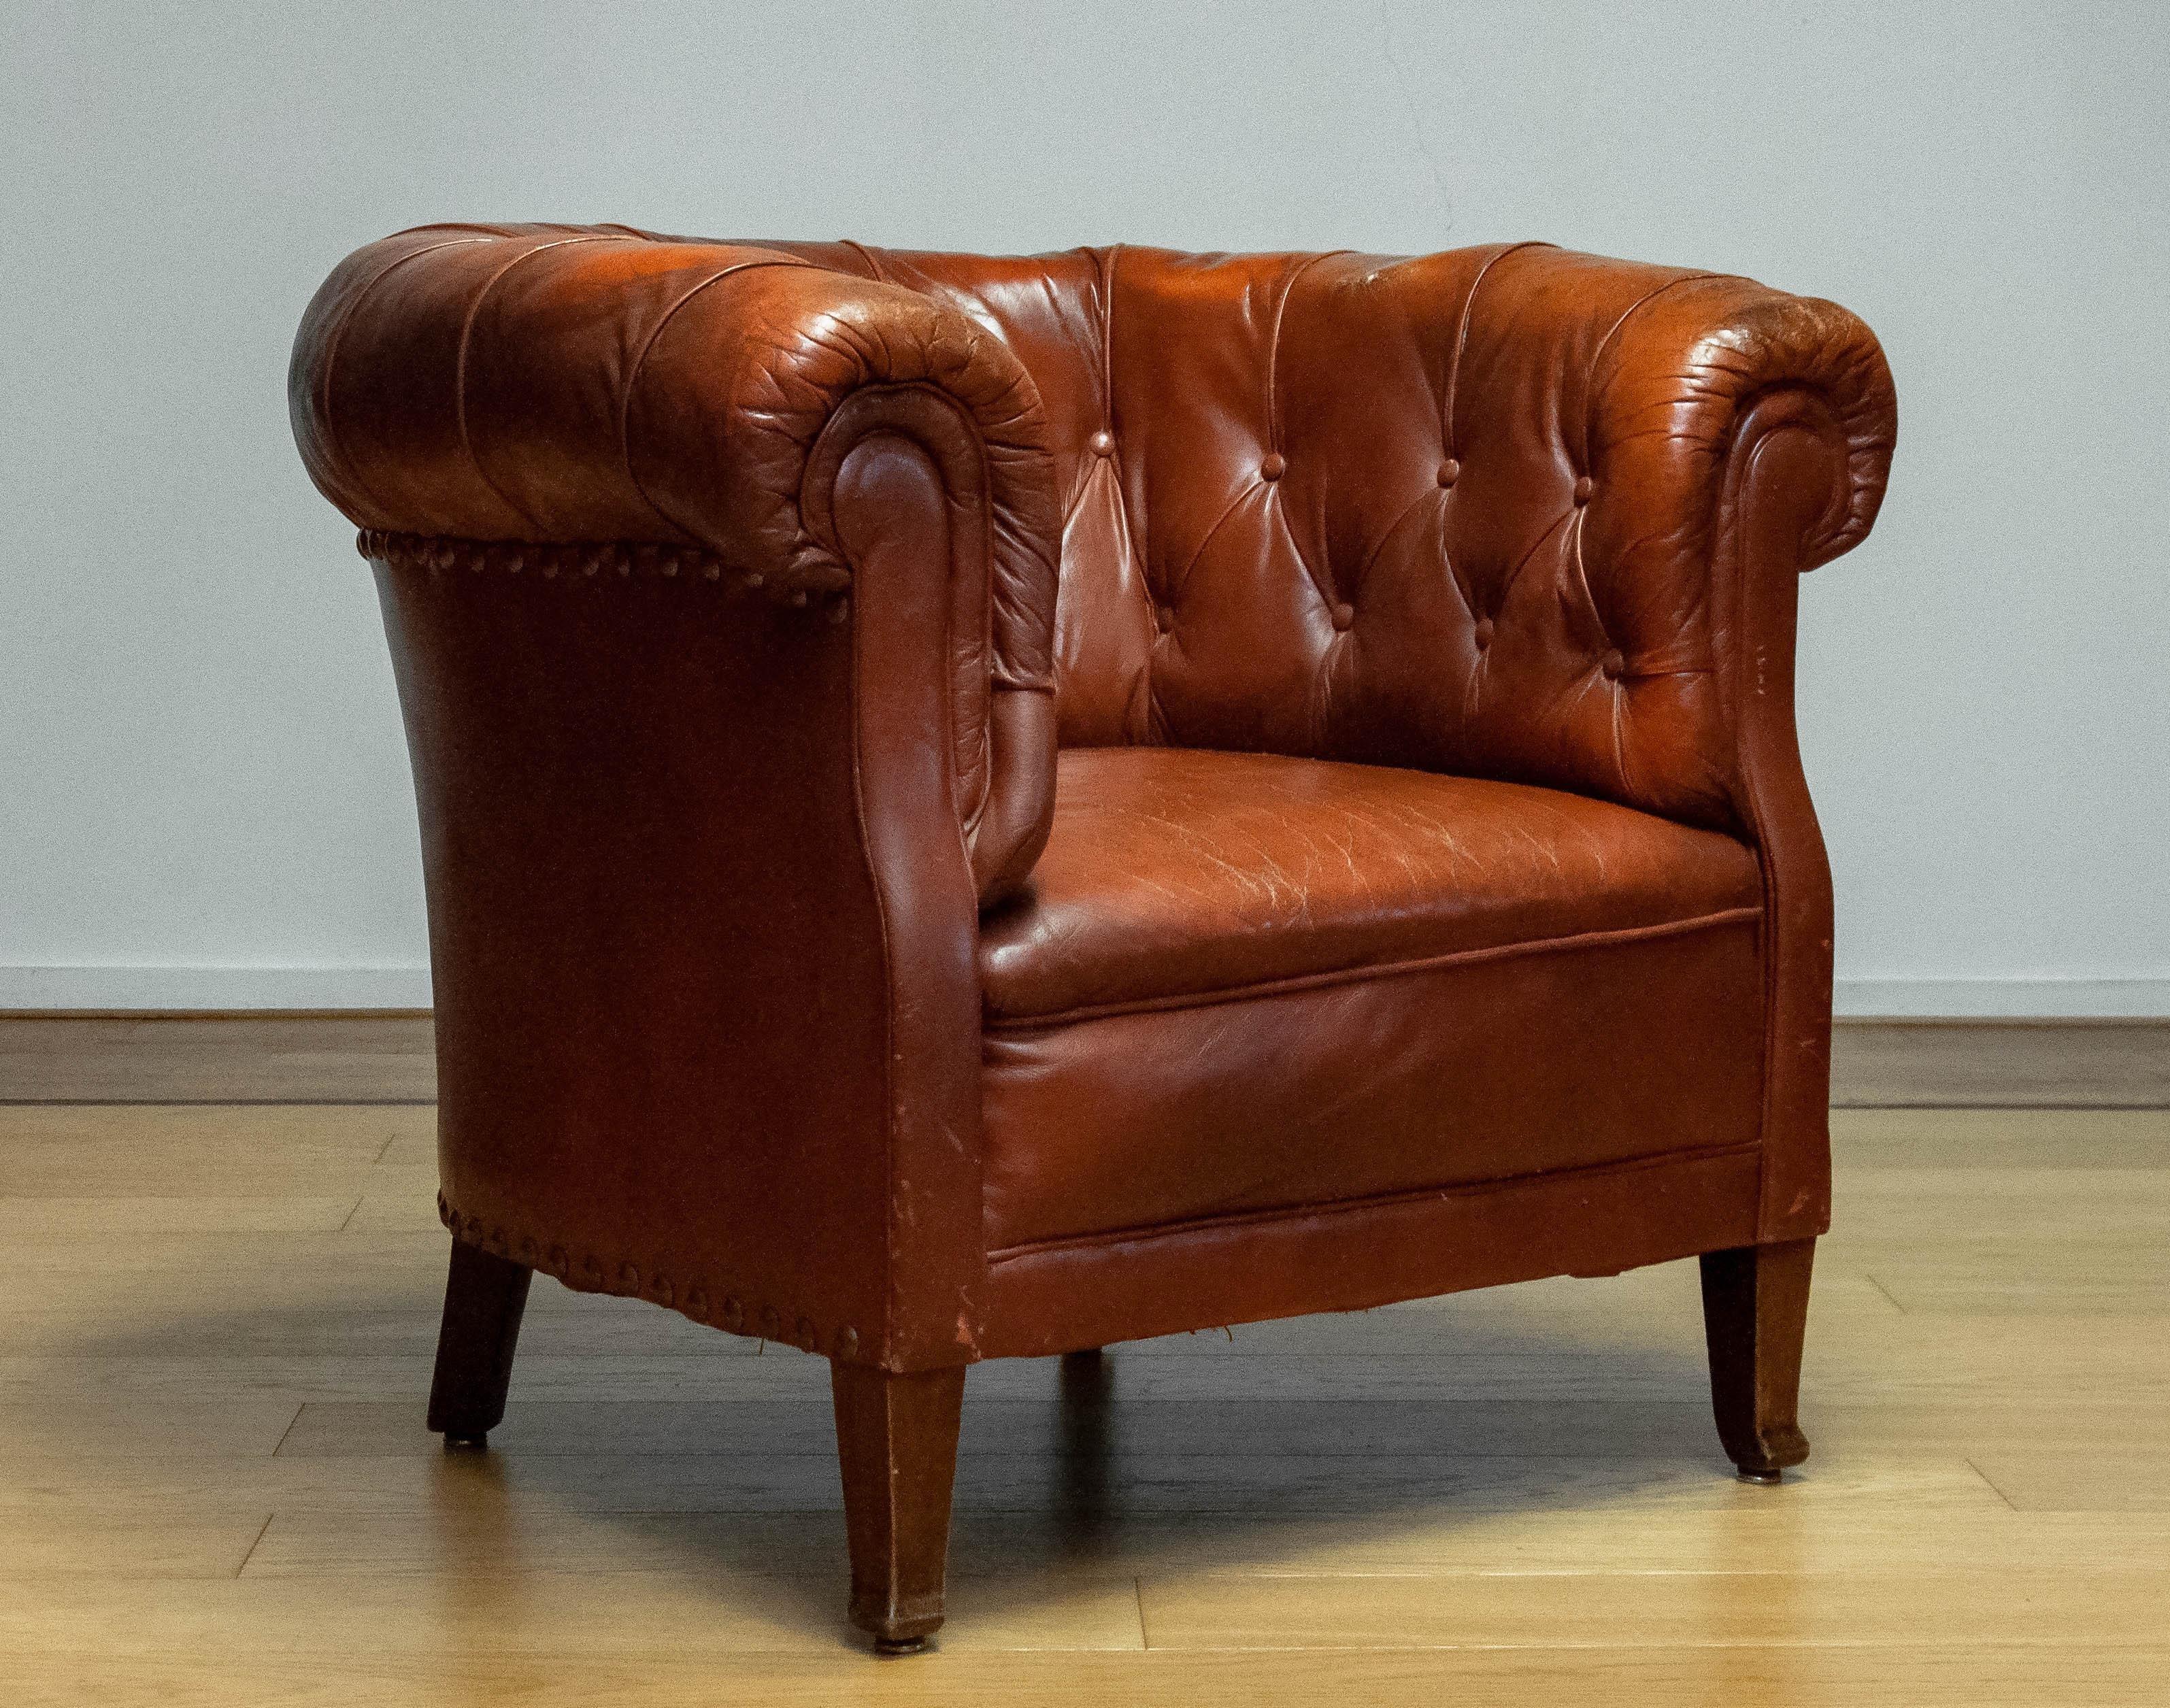 1940s Swedish Tufted Club Chair 'Chesterfield Model' In Tan Brown Worn Leather 1